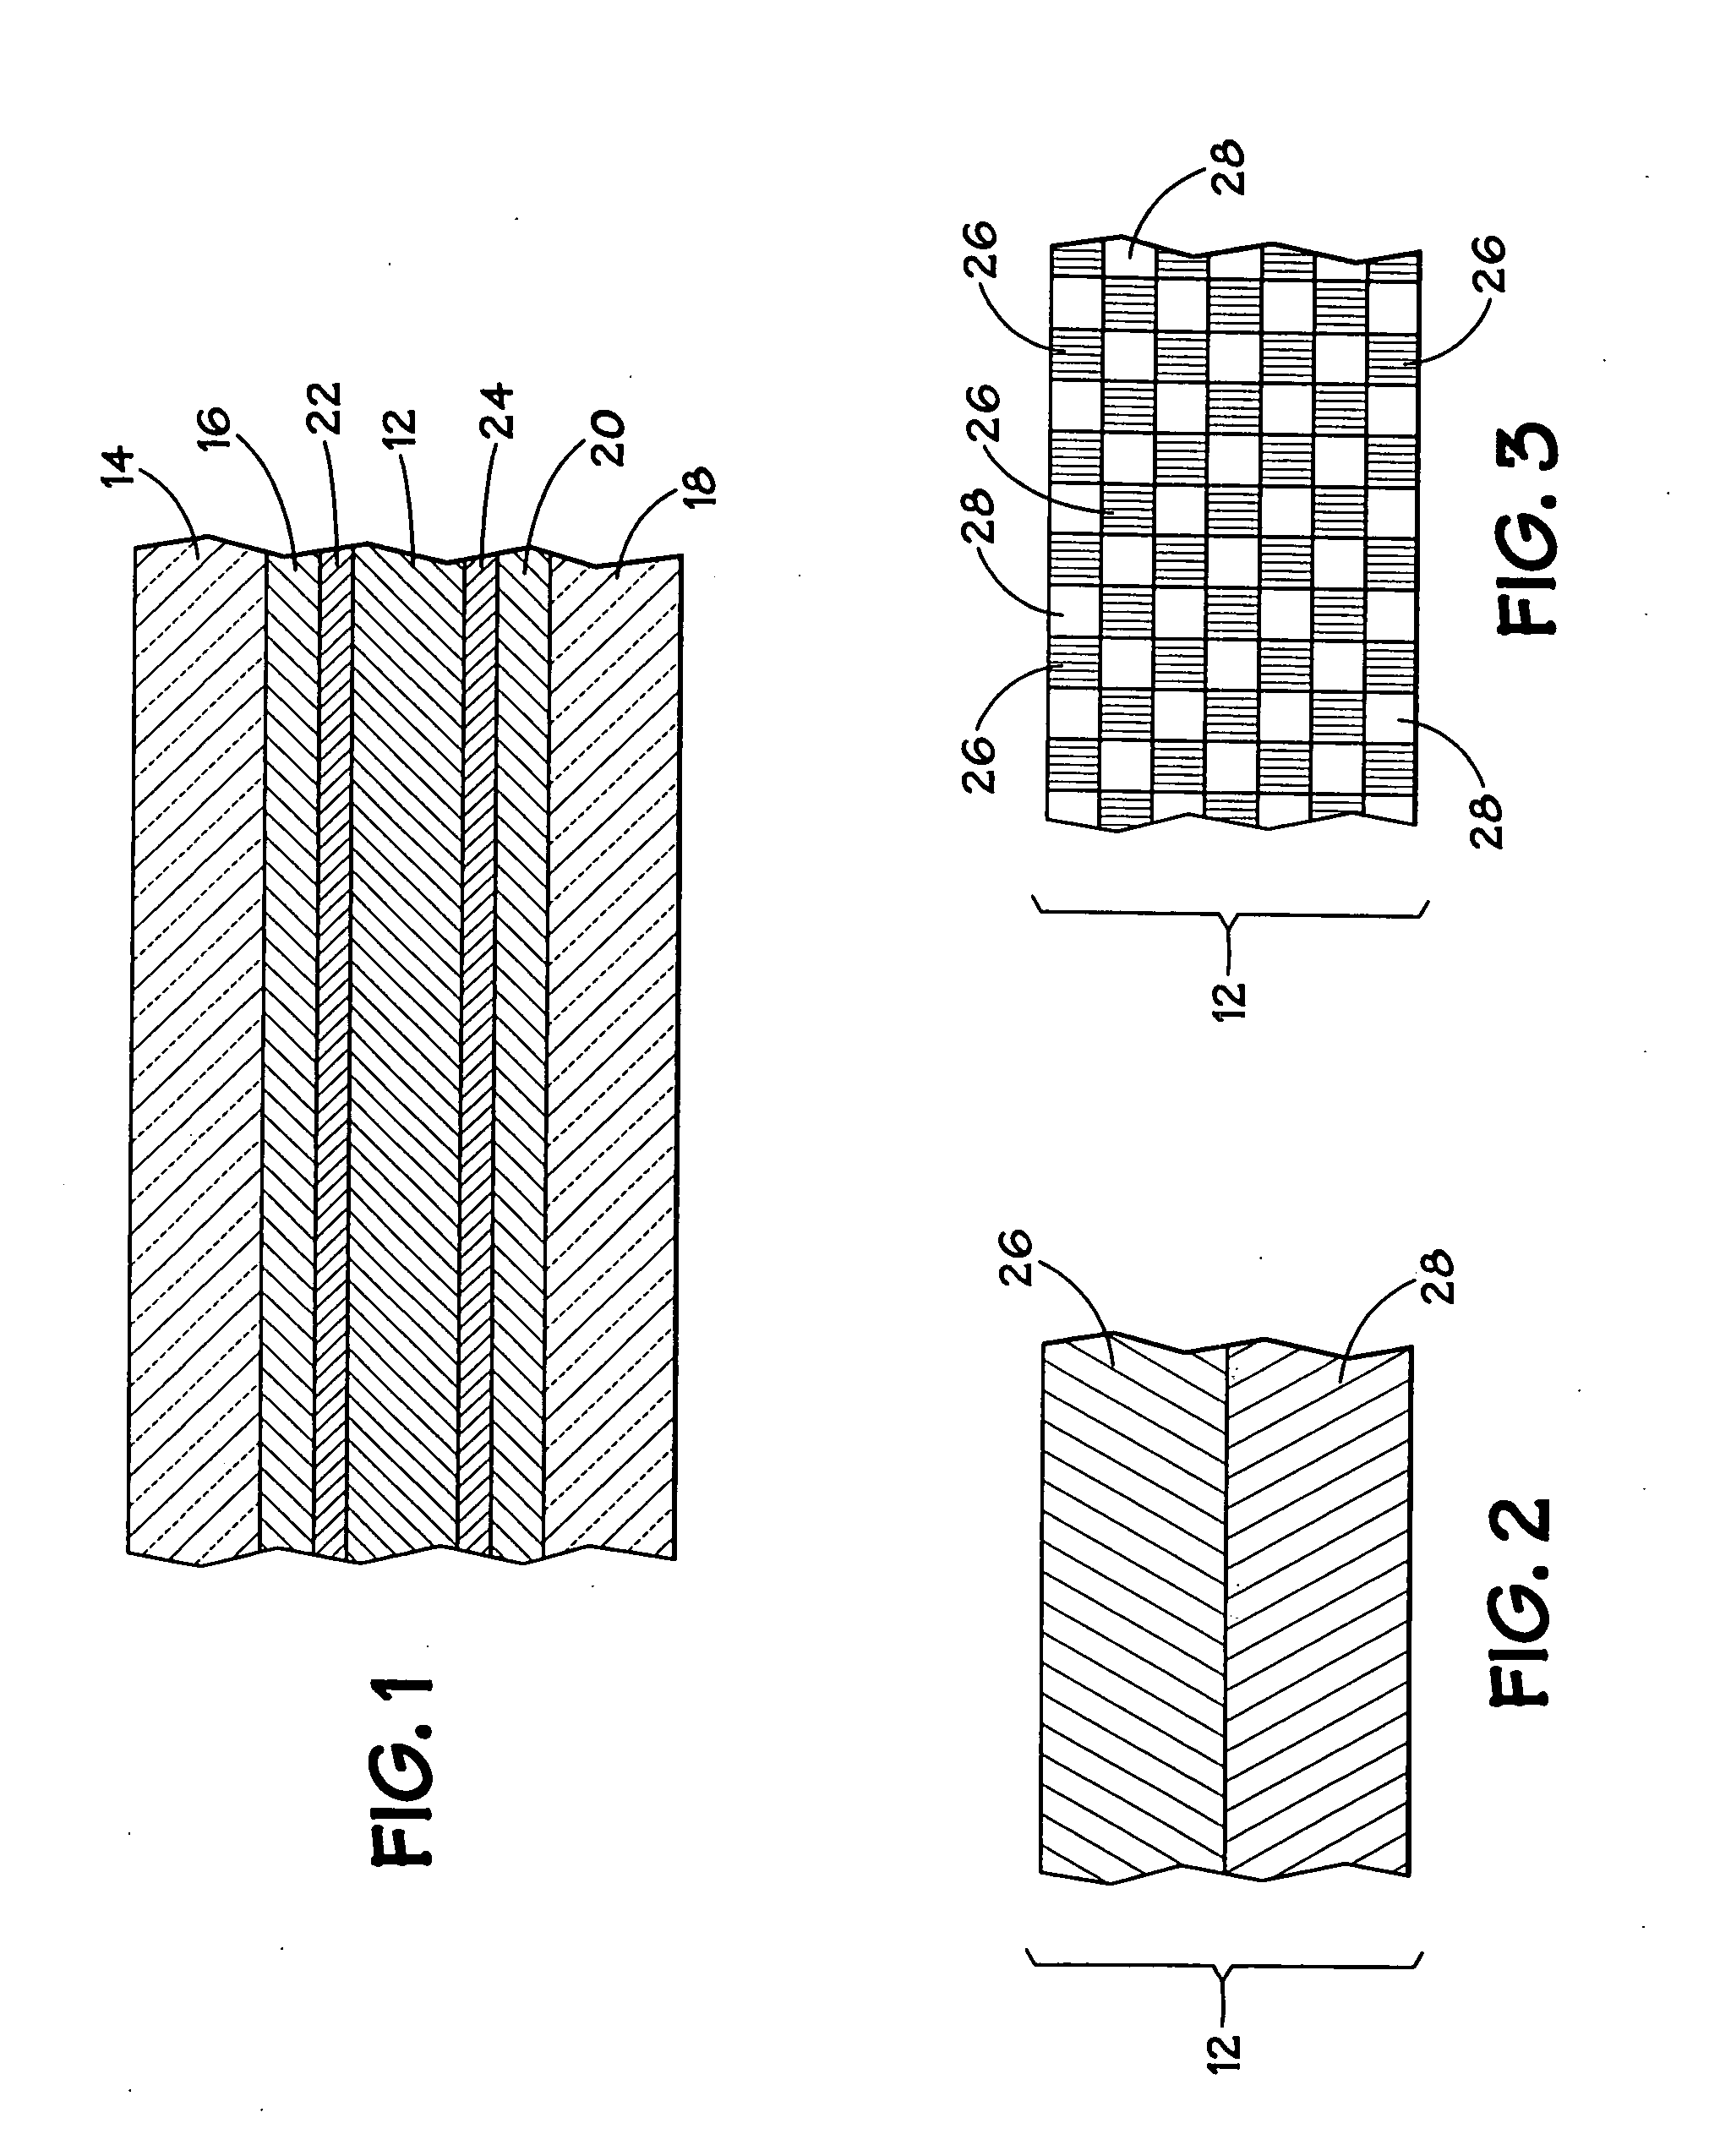 Dye sensitized solar cells having blocking layers and methods of manufacturing the same